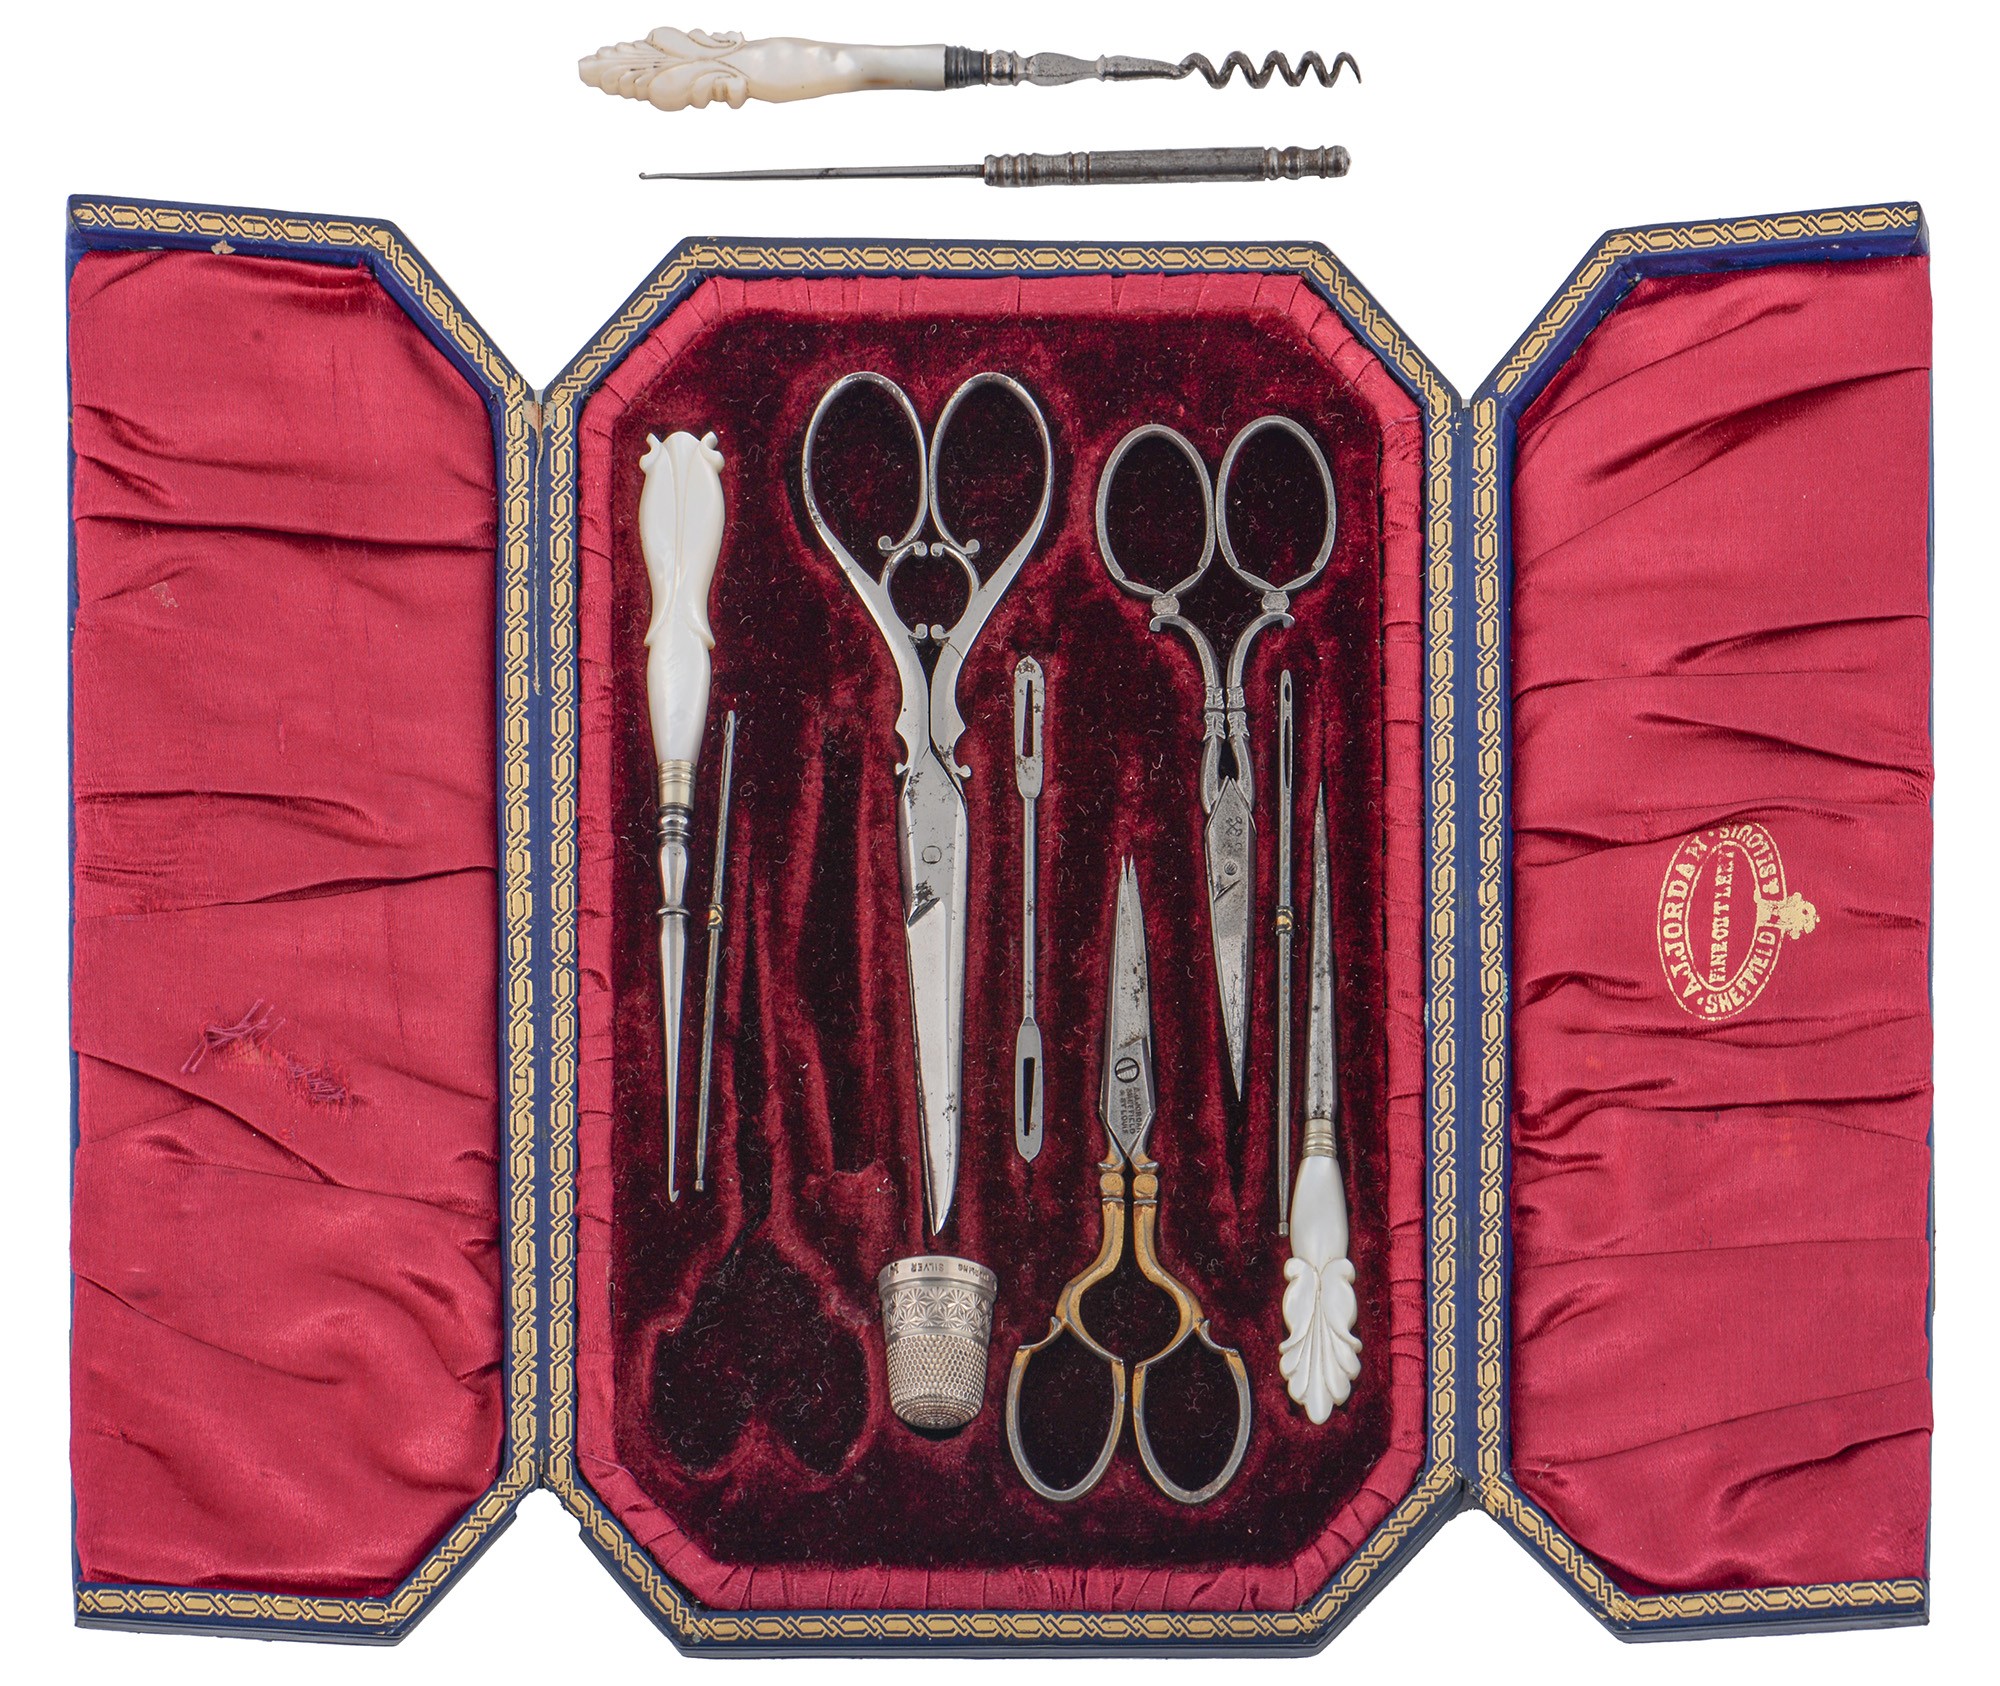 Needlework tools. A composed set of Victorian mother of pearl handled burnished steel sewing tools